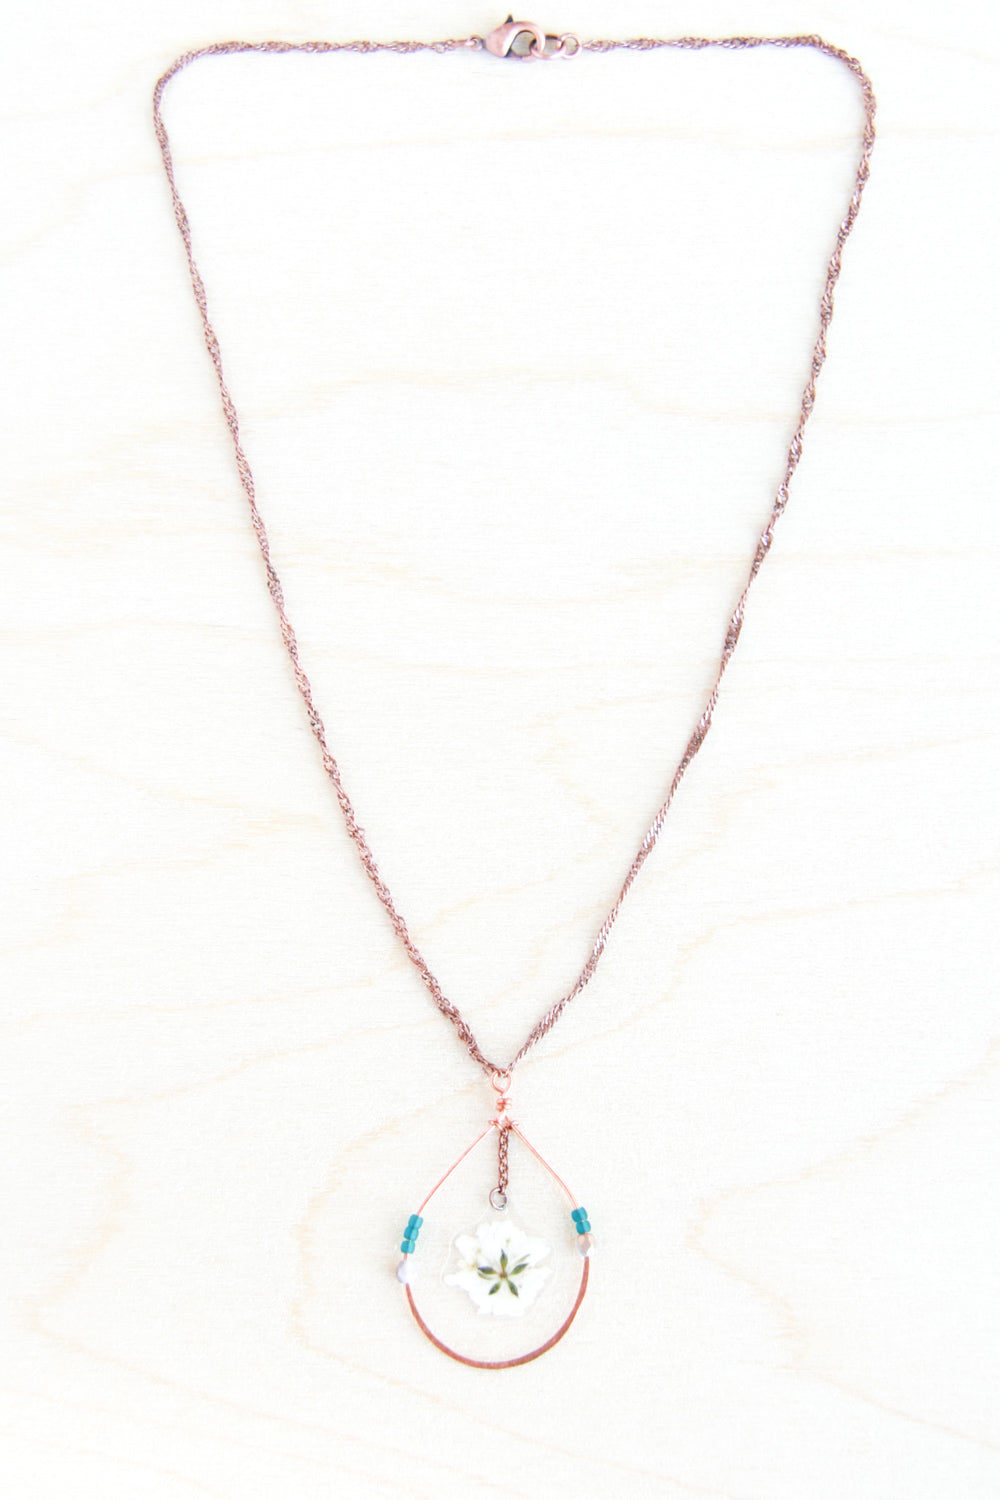 Baby’s Breath Pressed Flower Necklace with Copper Teardrop Hoops and Teal Glass Beads